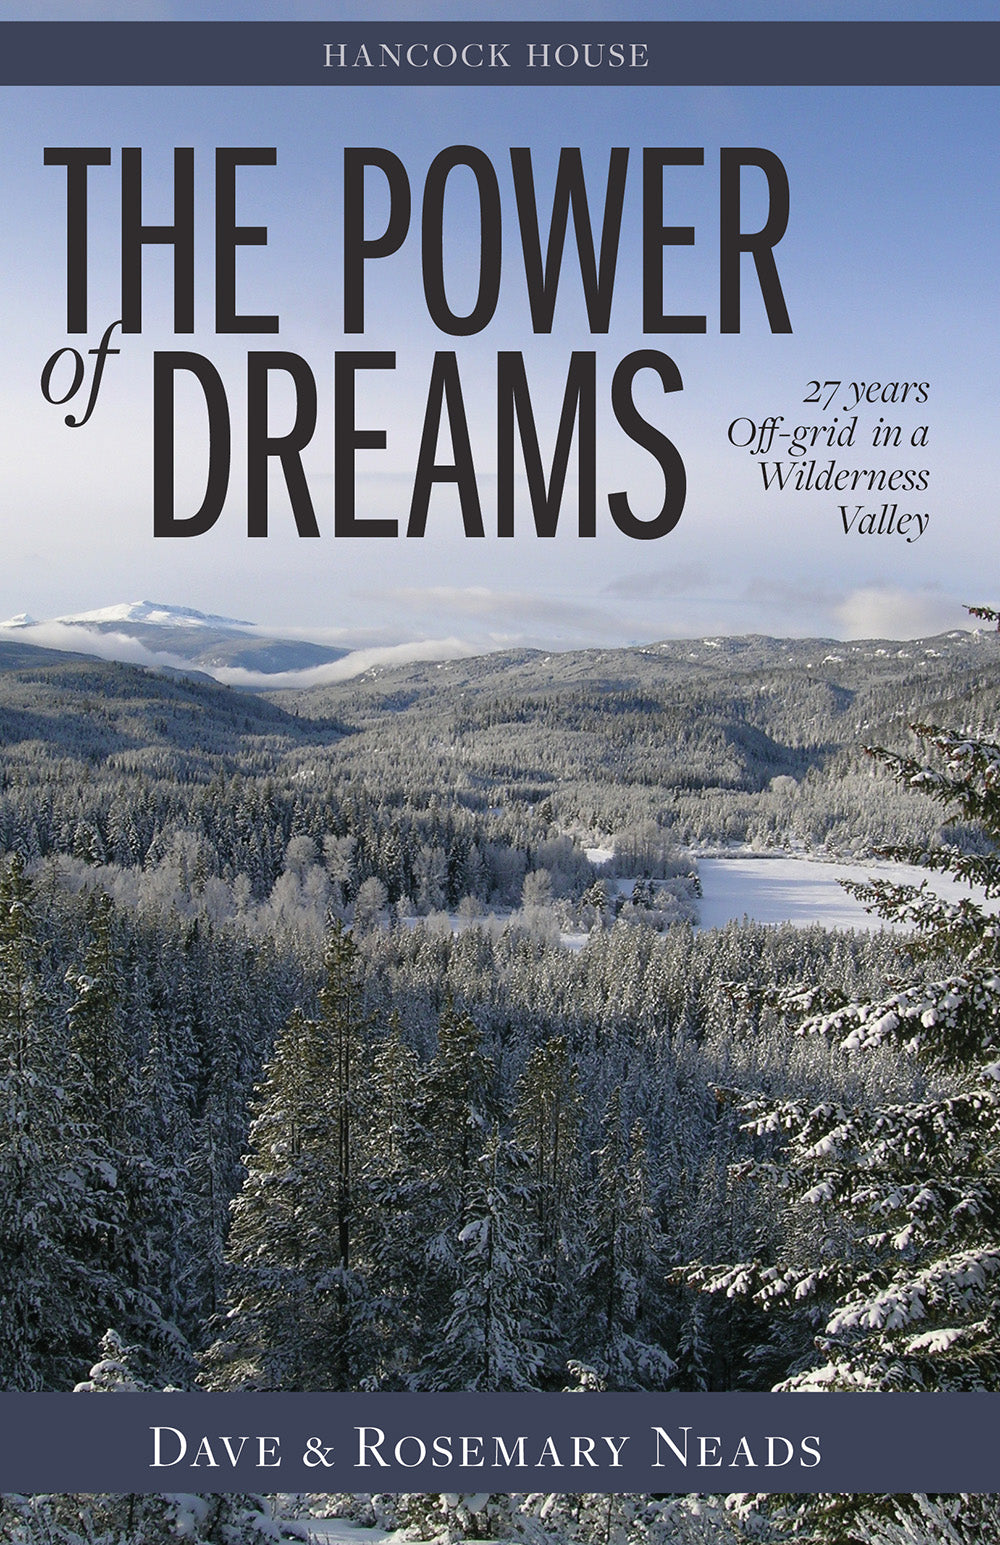 The Power of Dreams: 27 Years Off-grid in a Wilderness Valley